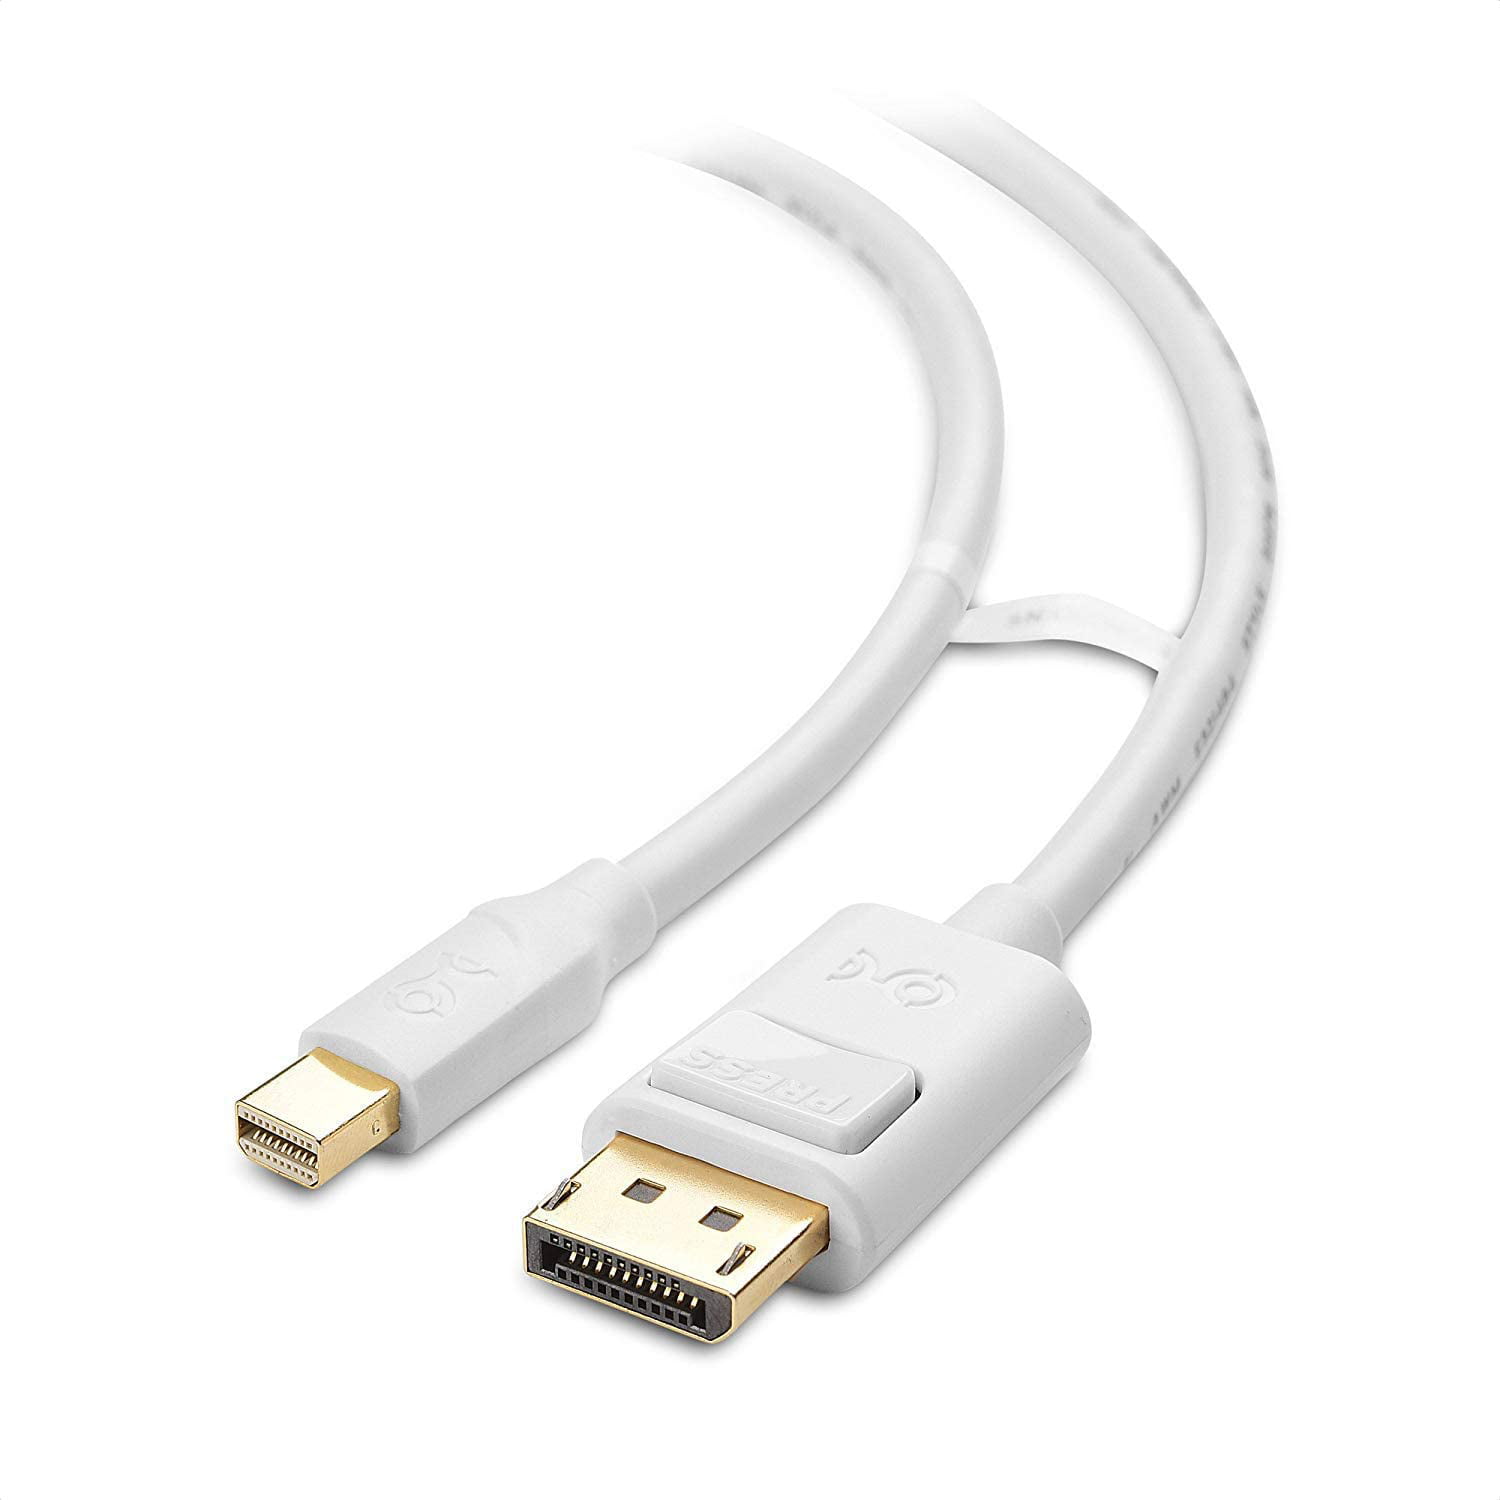 Cable Matters Mini DisplayPort to DisplayPort Cable in White 15 Feet Thunderbolt and Thunderbolt 2 Port Compatible Mini DP to DP 